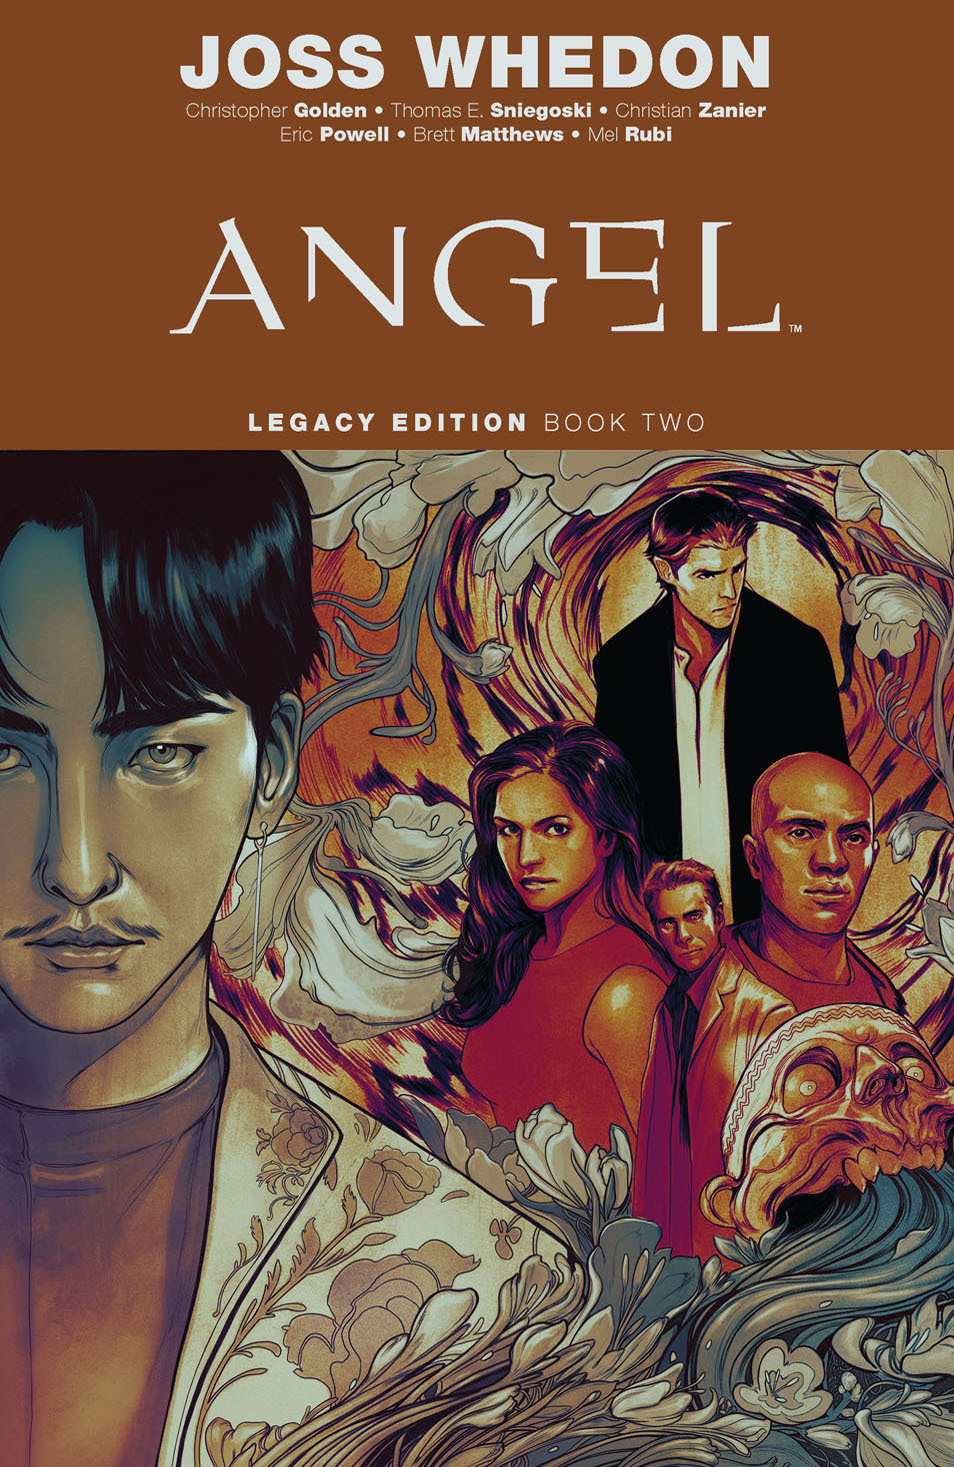 This image is the cover for the book Angel Legacy Edition Book Two, Angel